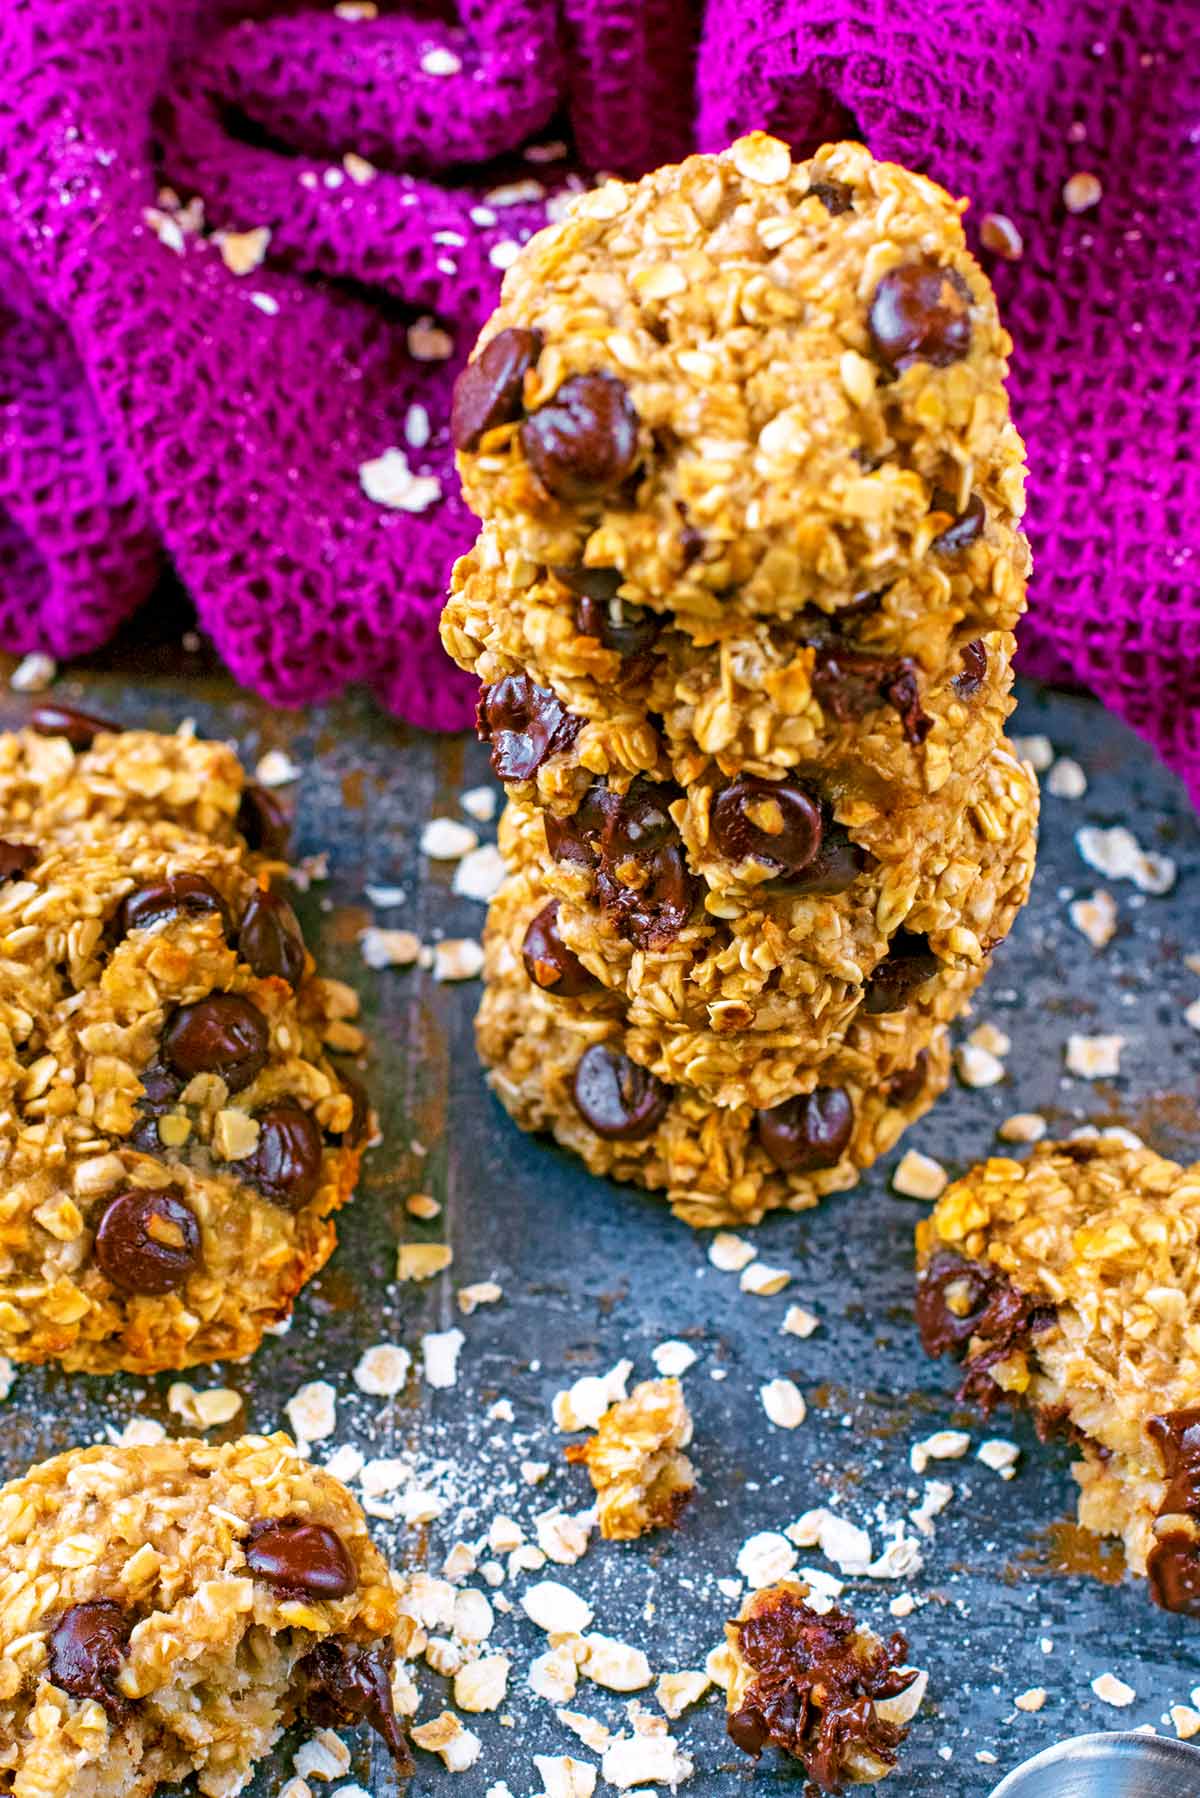 Oat cookies in a pile with oats scattered around.